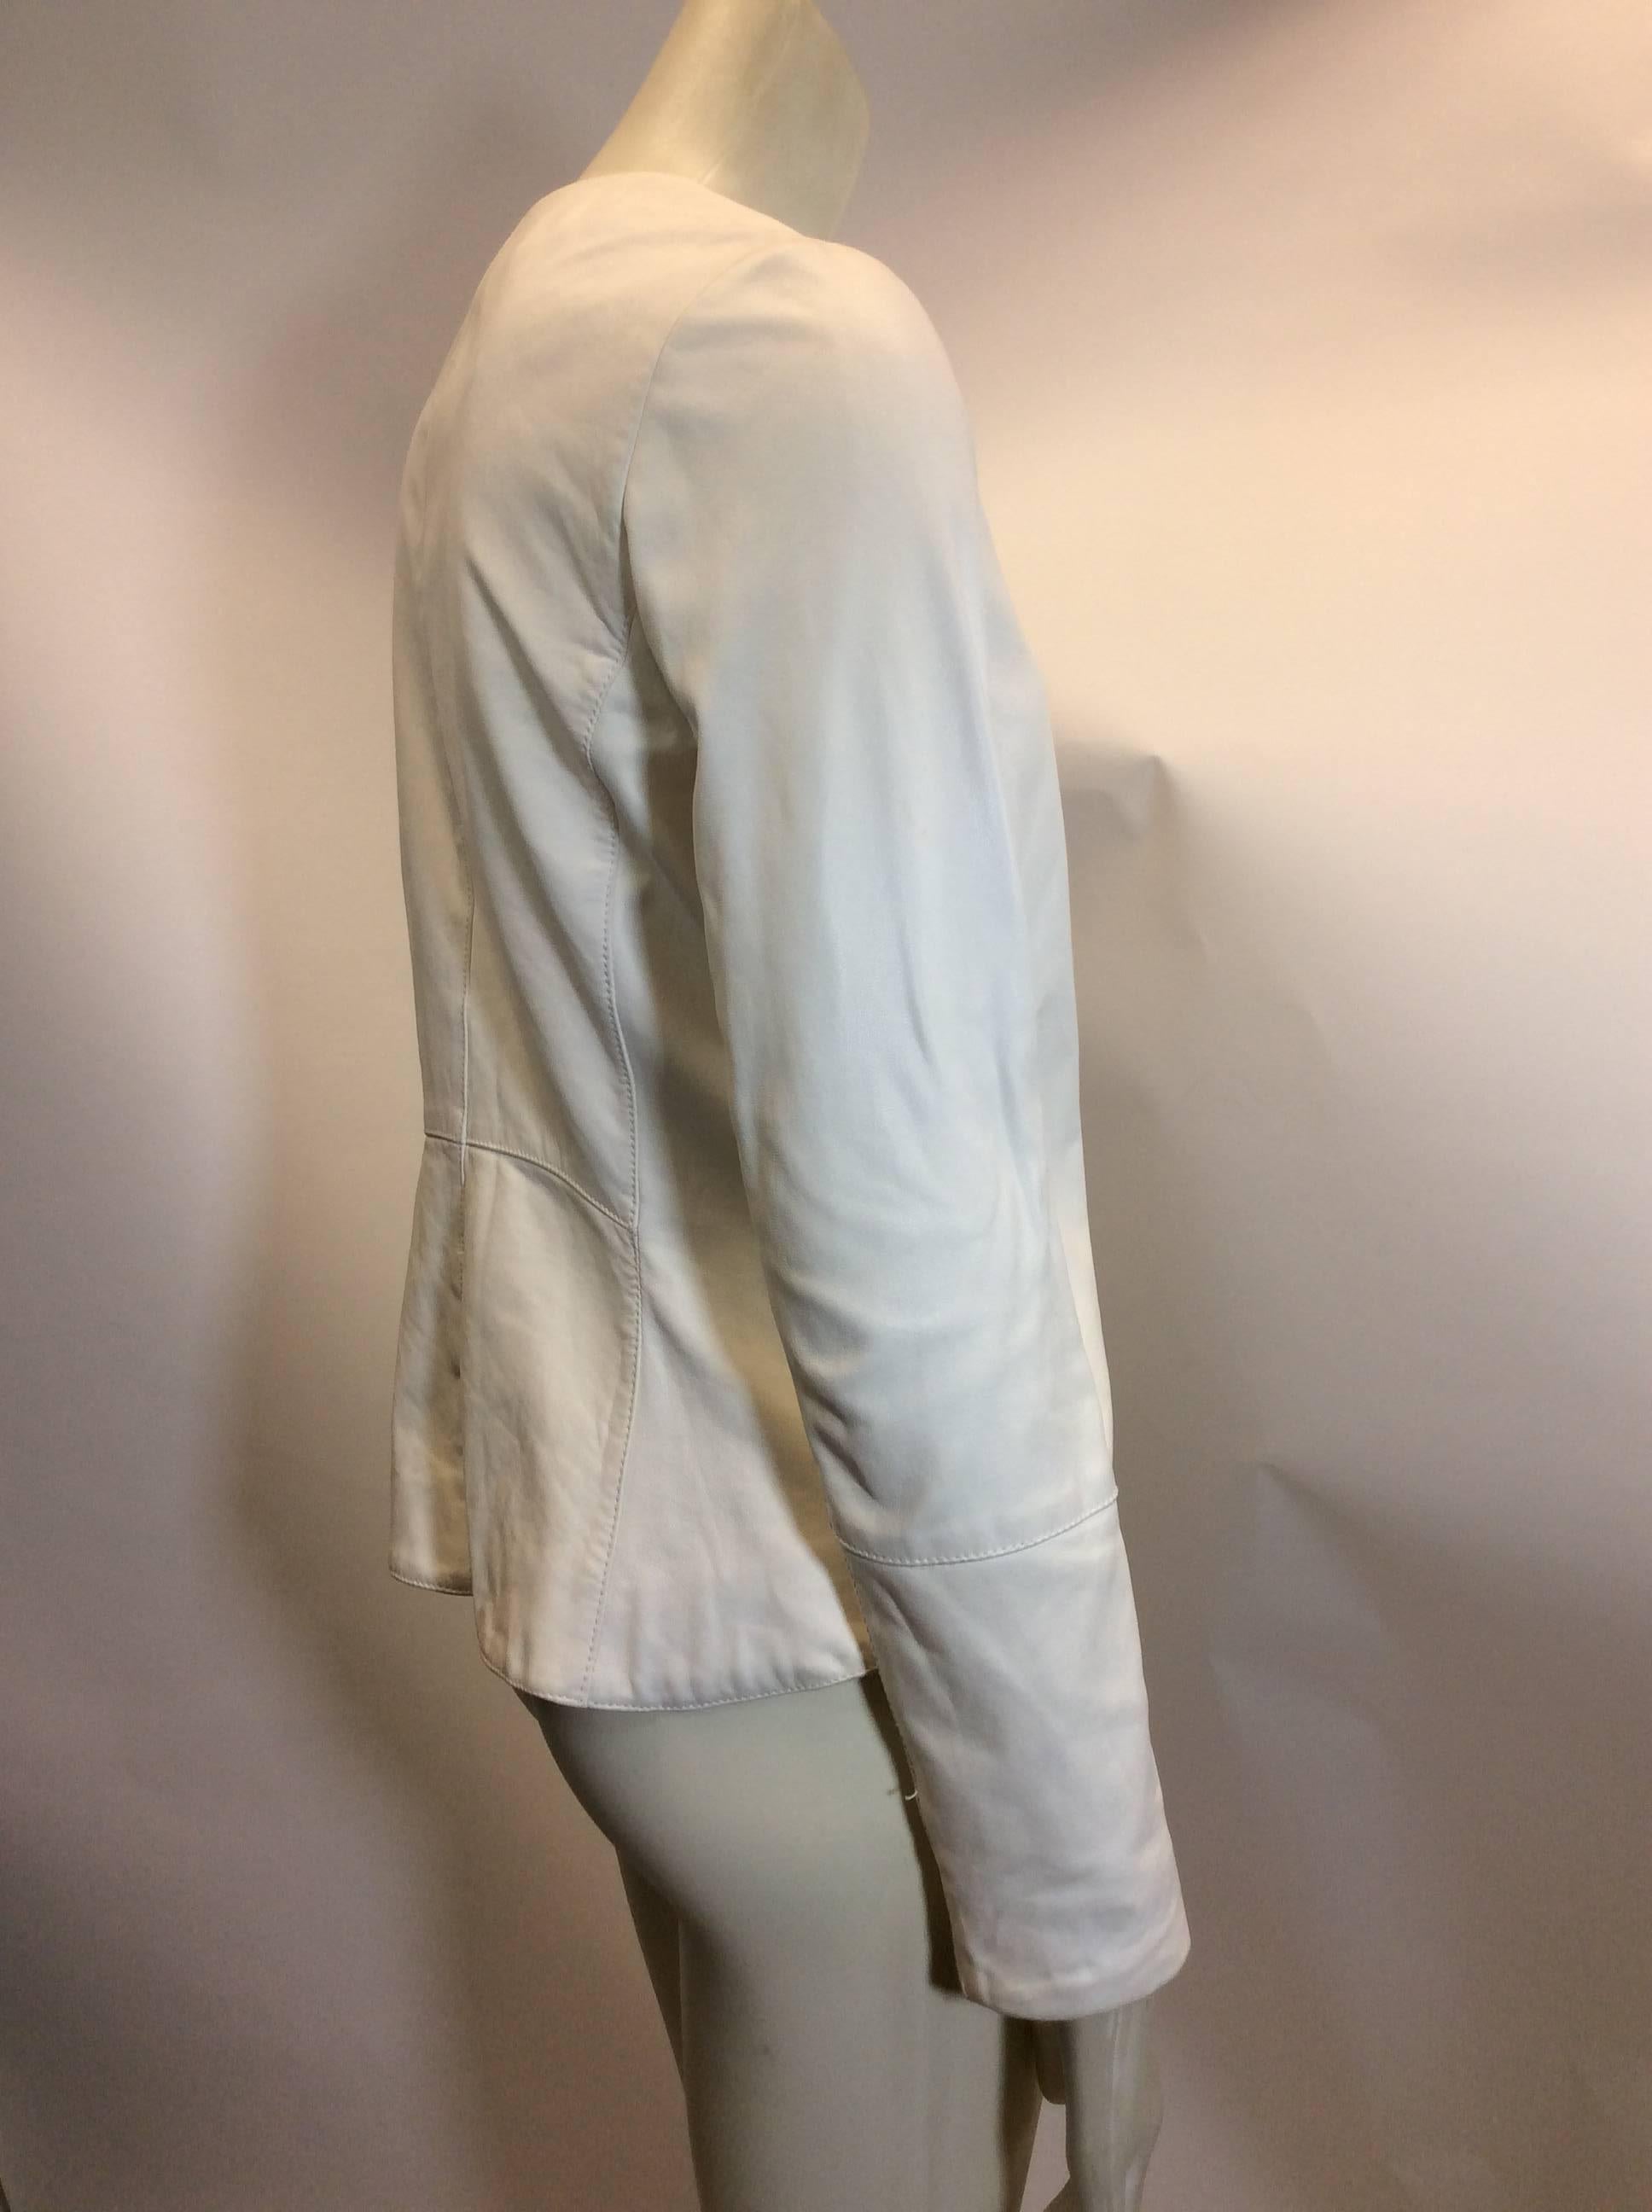 Vince White Leather Zip Up Jacket In Good Condition For Sale In Narberth, PA